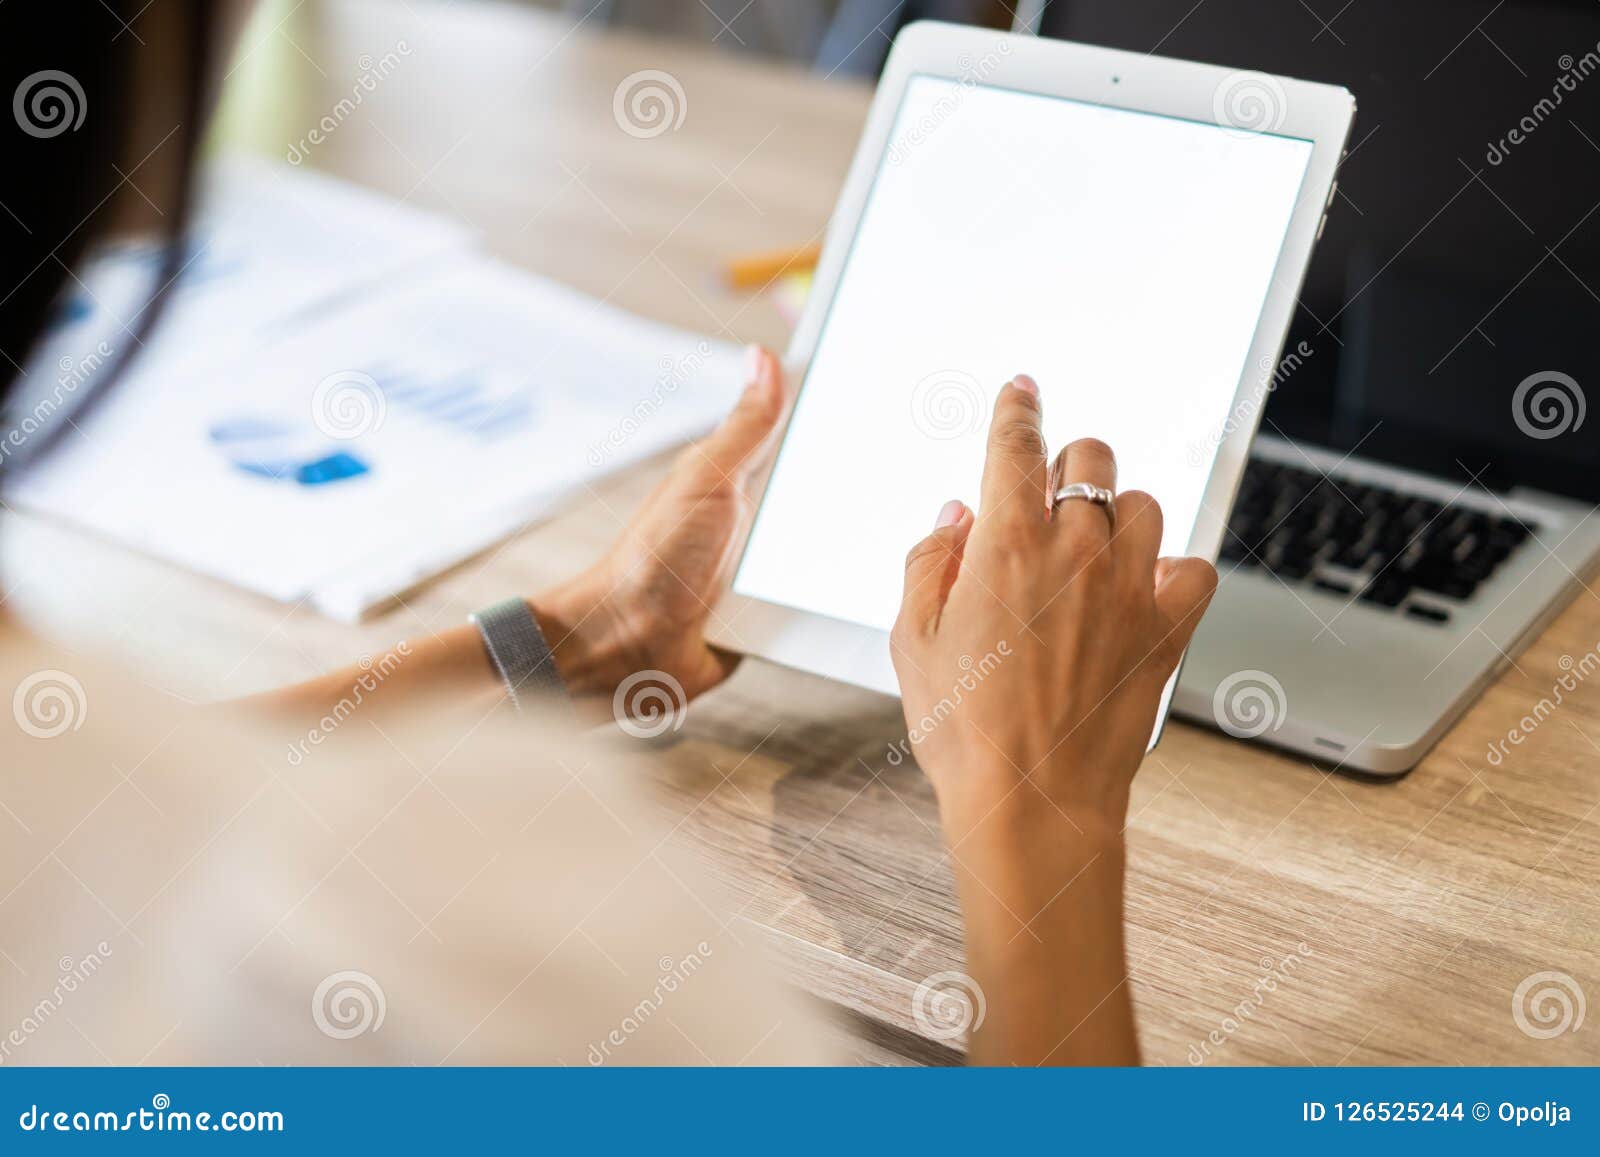 lifestyle with modern woman using tablet or ipad with hand holding touchscreen. hands of working woman with smart tablet